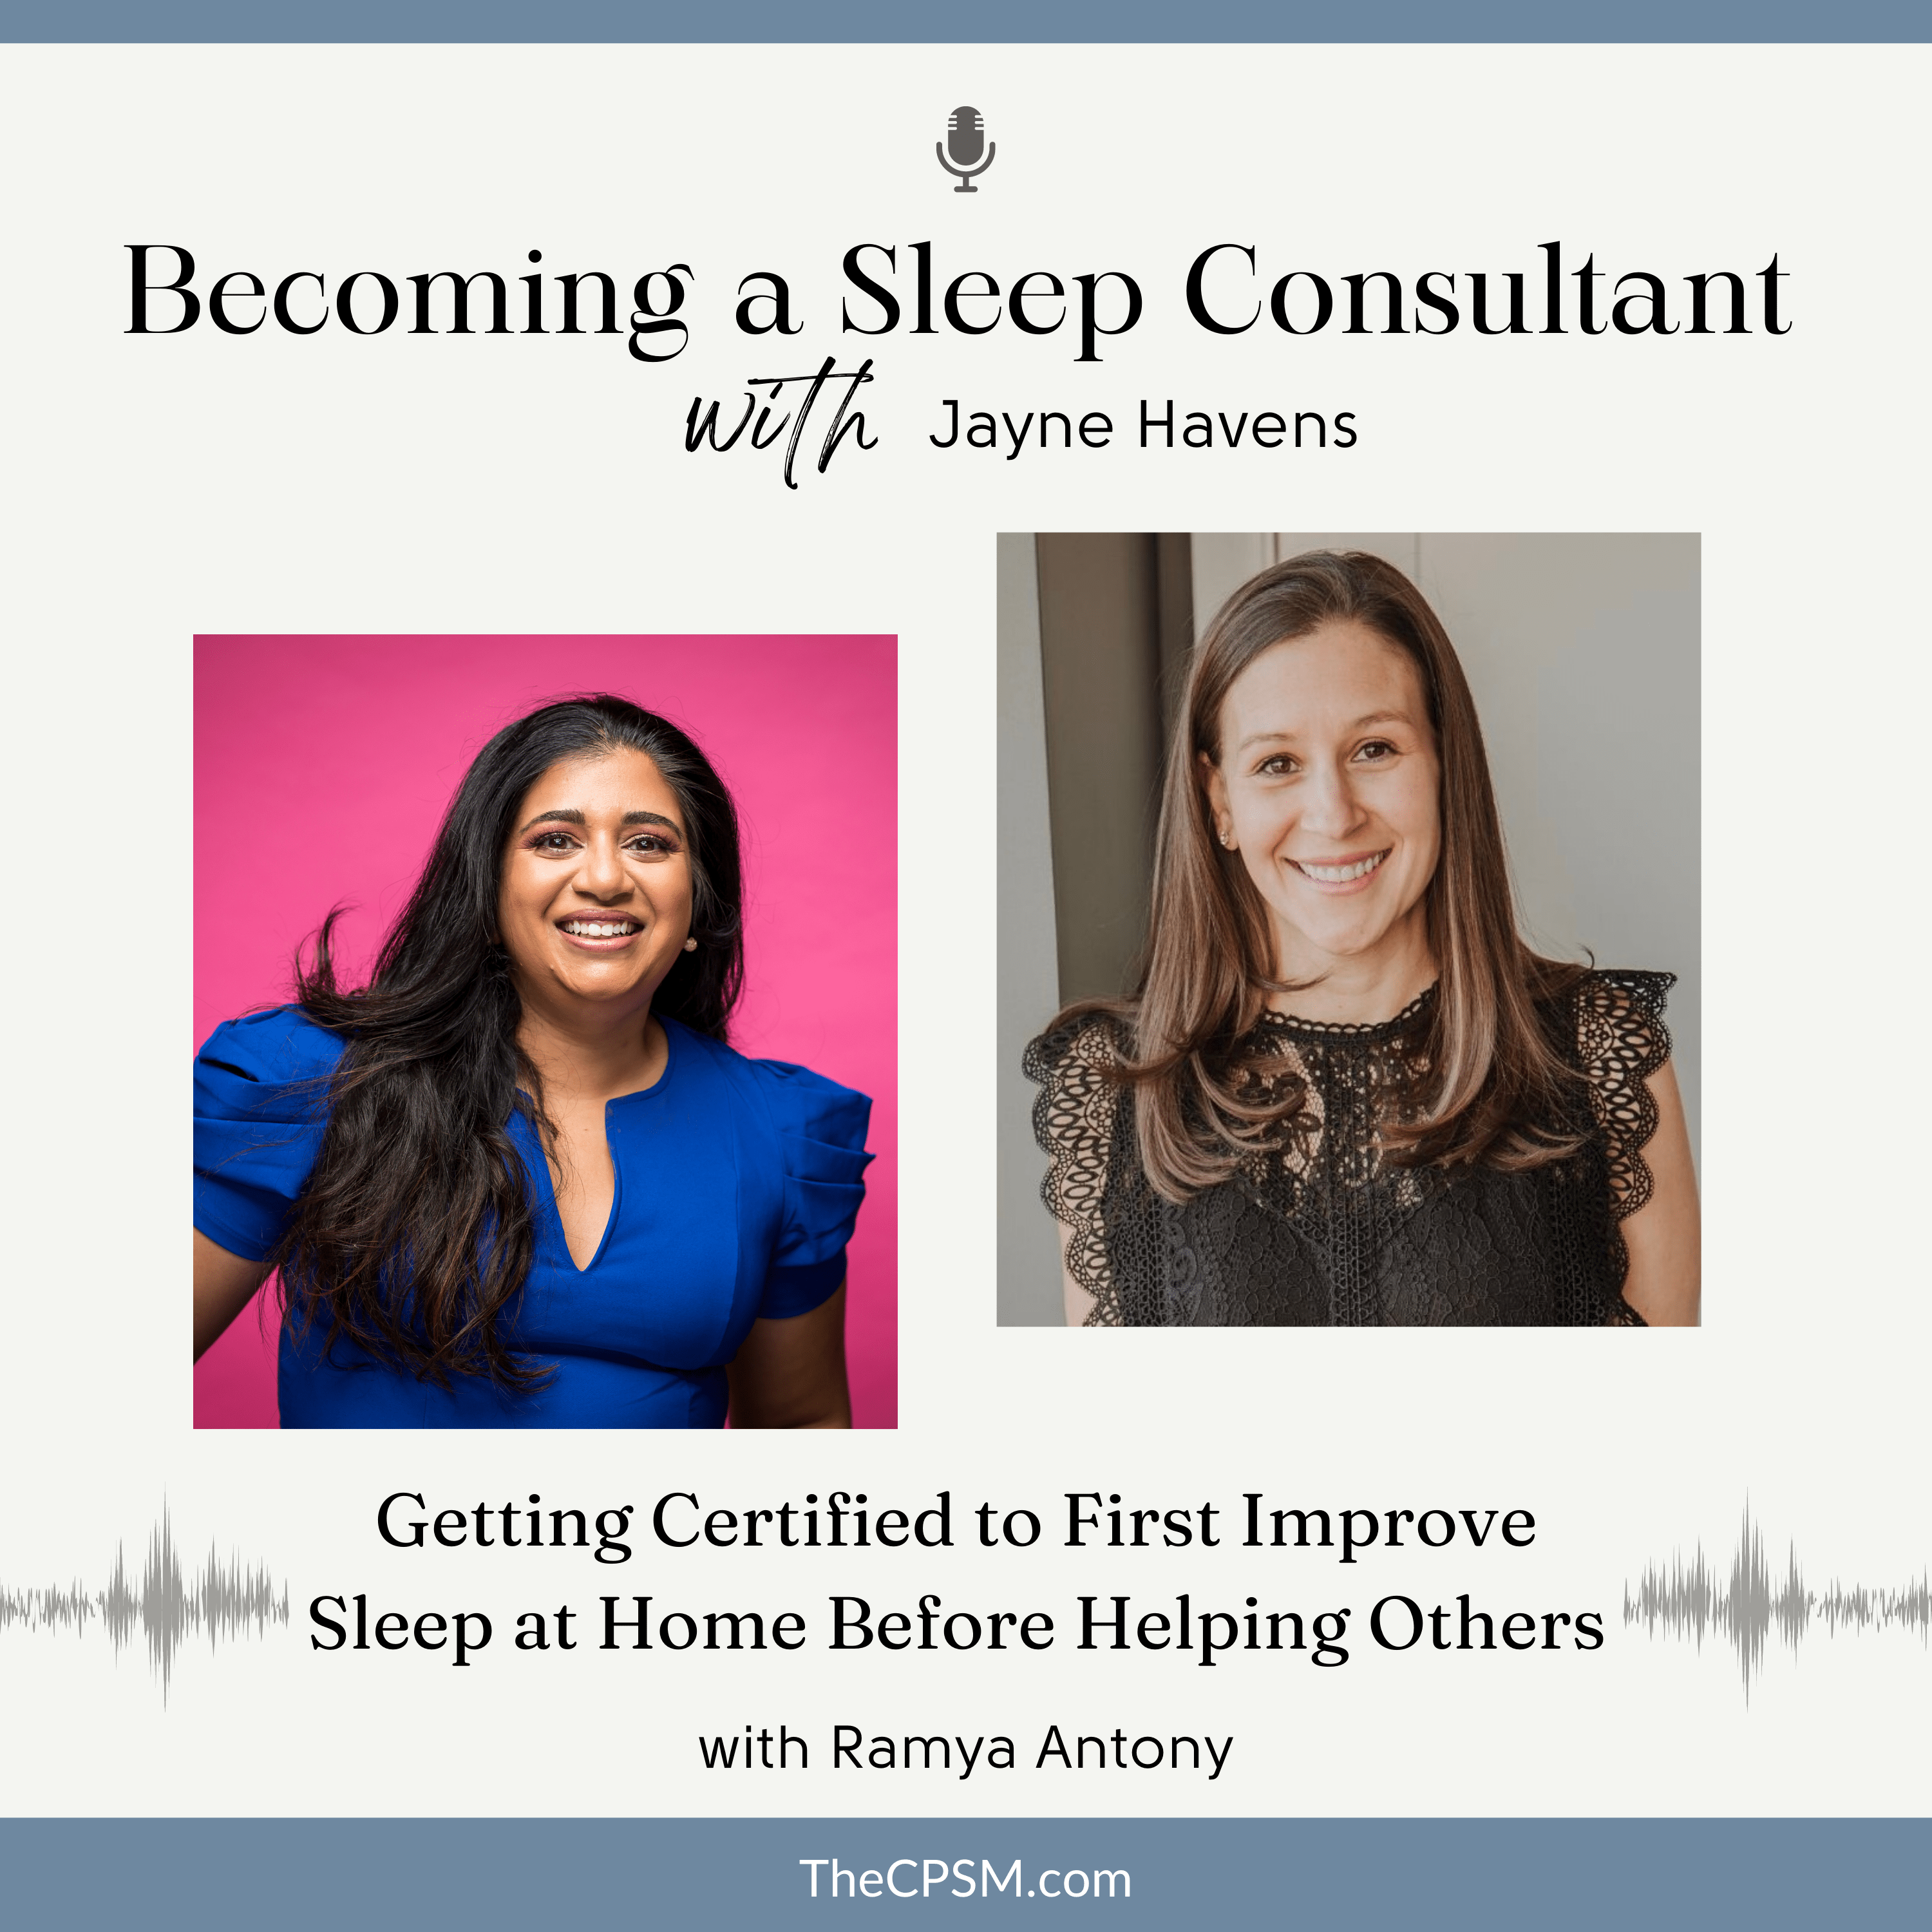 Getting Certified to First Improve Sleep at Home Before Helping Others with Ramya Antony